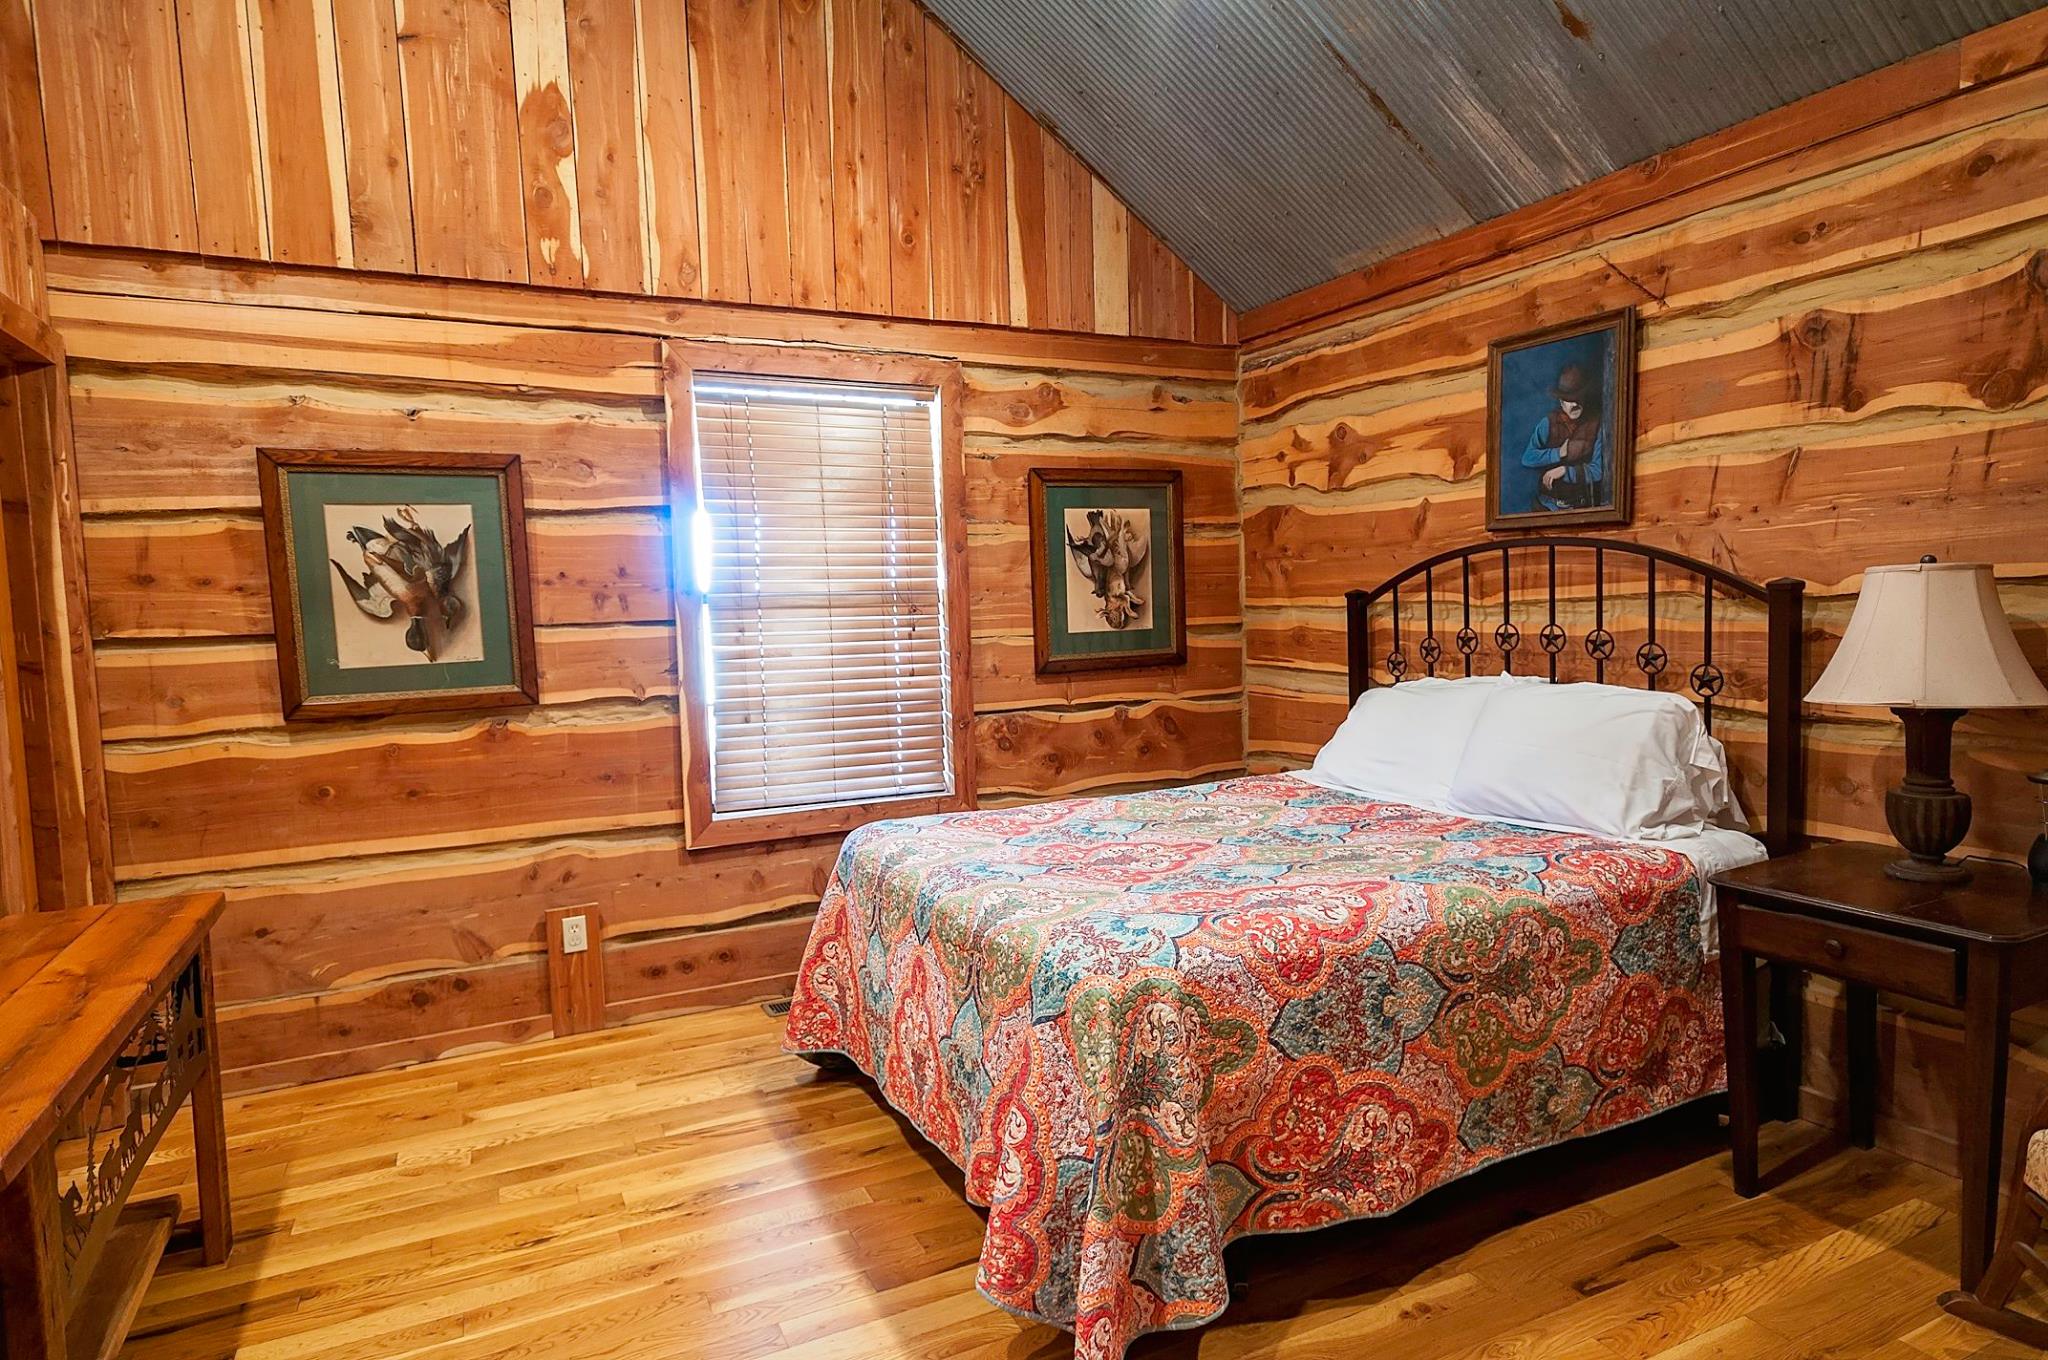 Relax in rustic luxury after lots of outdoor recreation.  You can fish, hunt, go four-wheeling, hike and explore all day without leaving the PRIVACY of this 315 acre fenced lake rental.